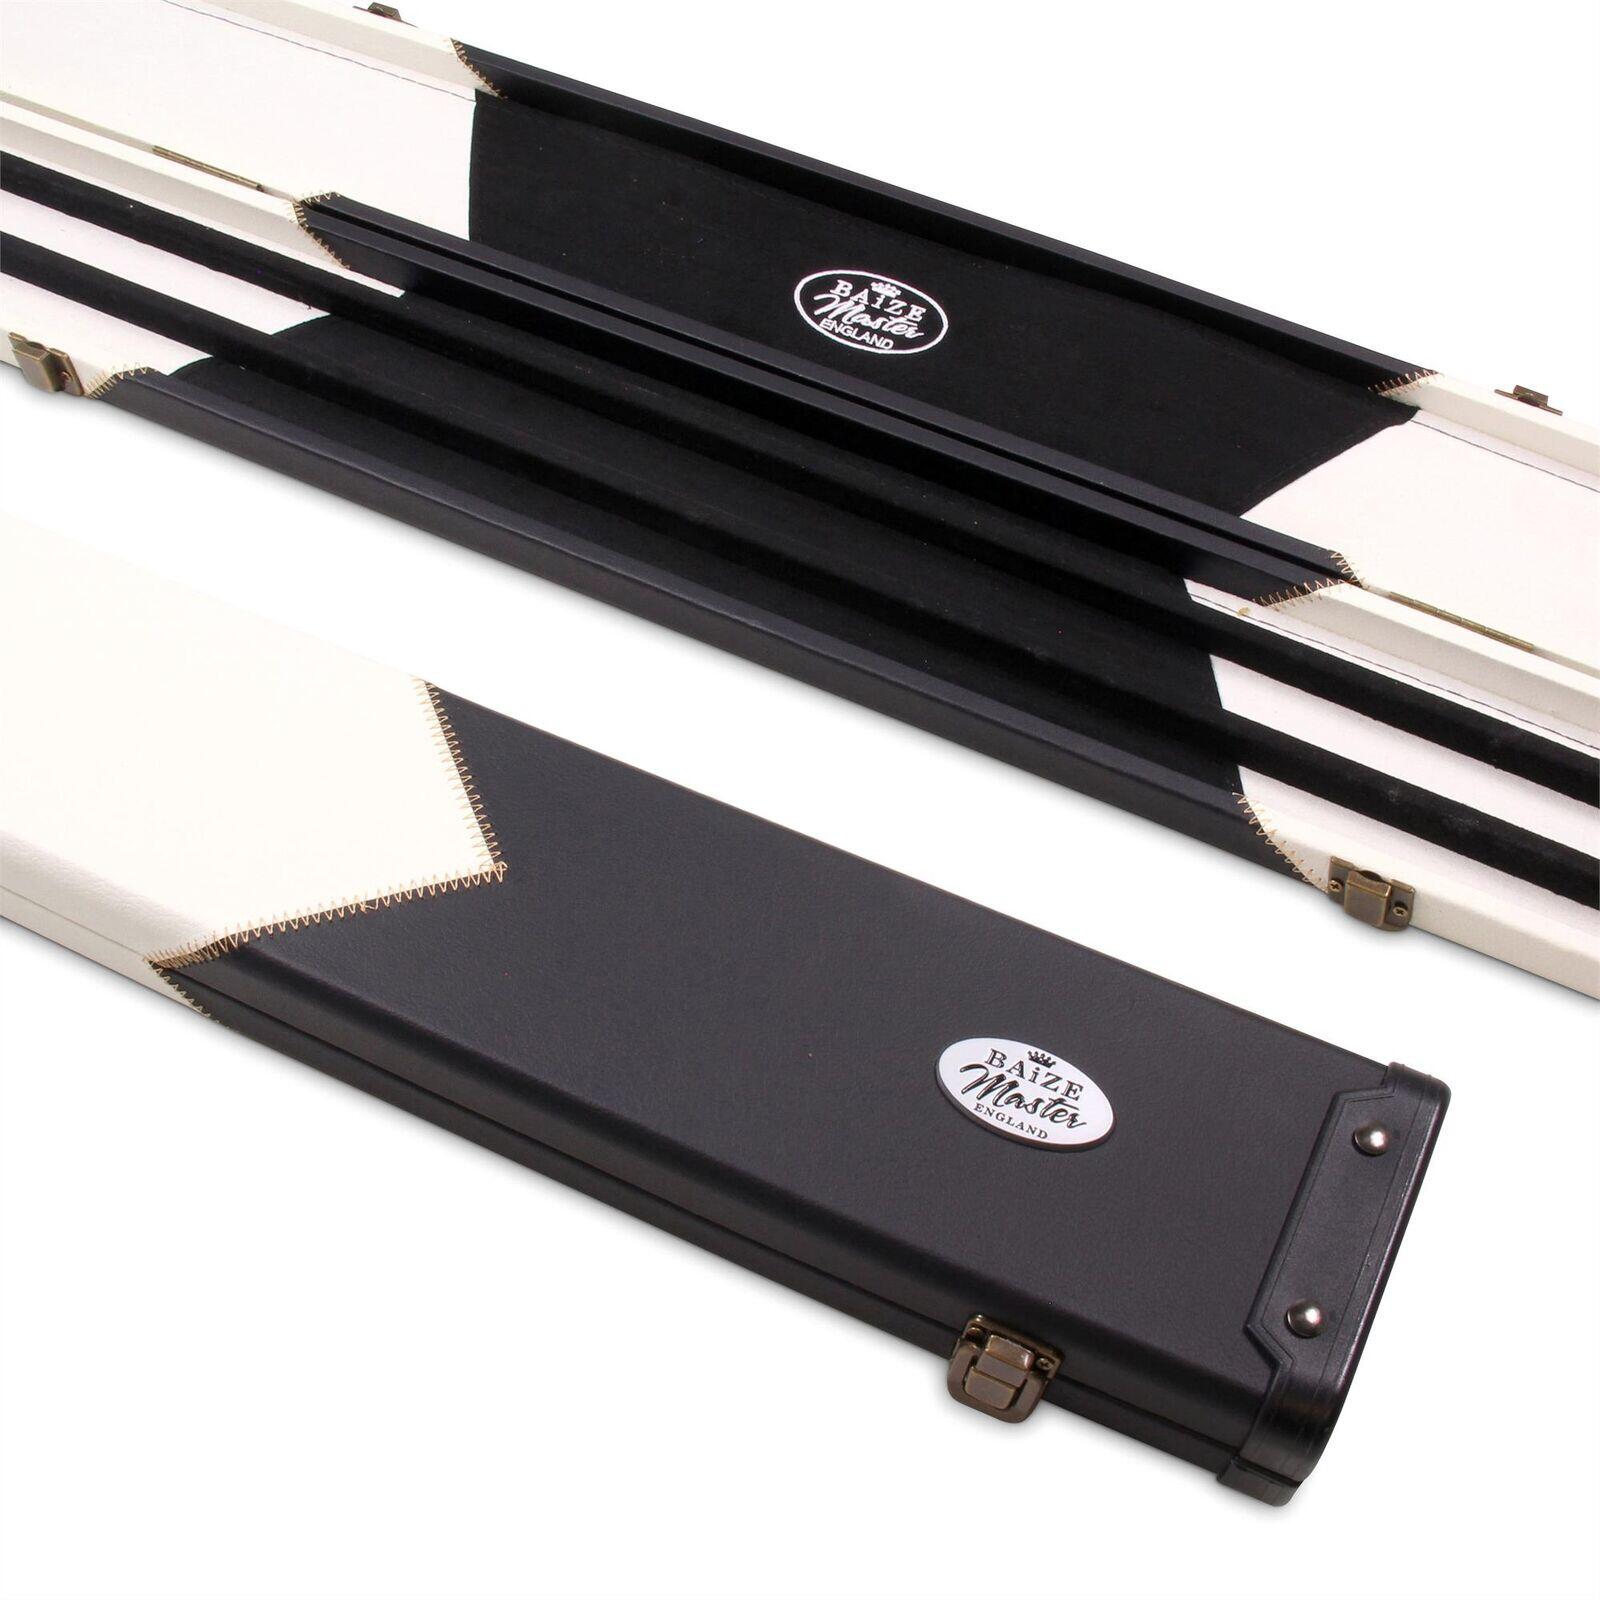 FUNKY CHALK Baize Master 1 Piece WIDE WHITE ARROW Snooker Pool Cue Case - Holds 3 Cues